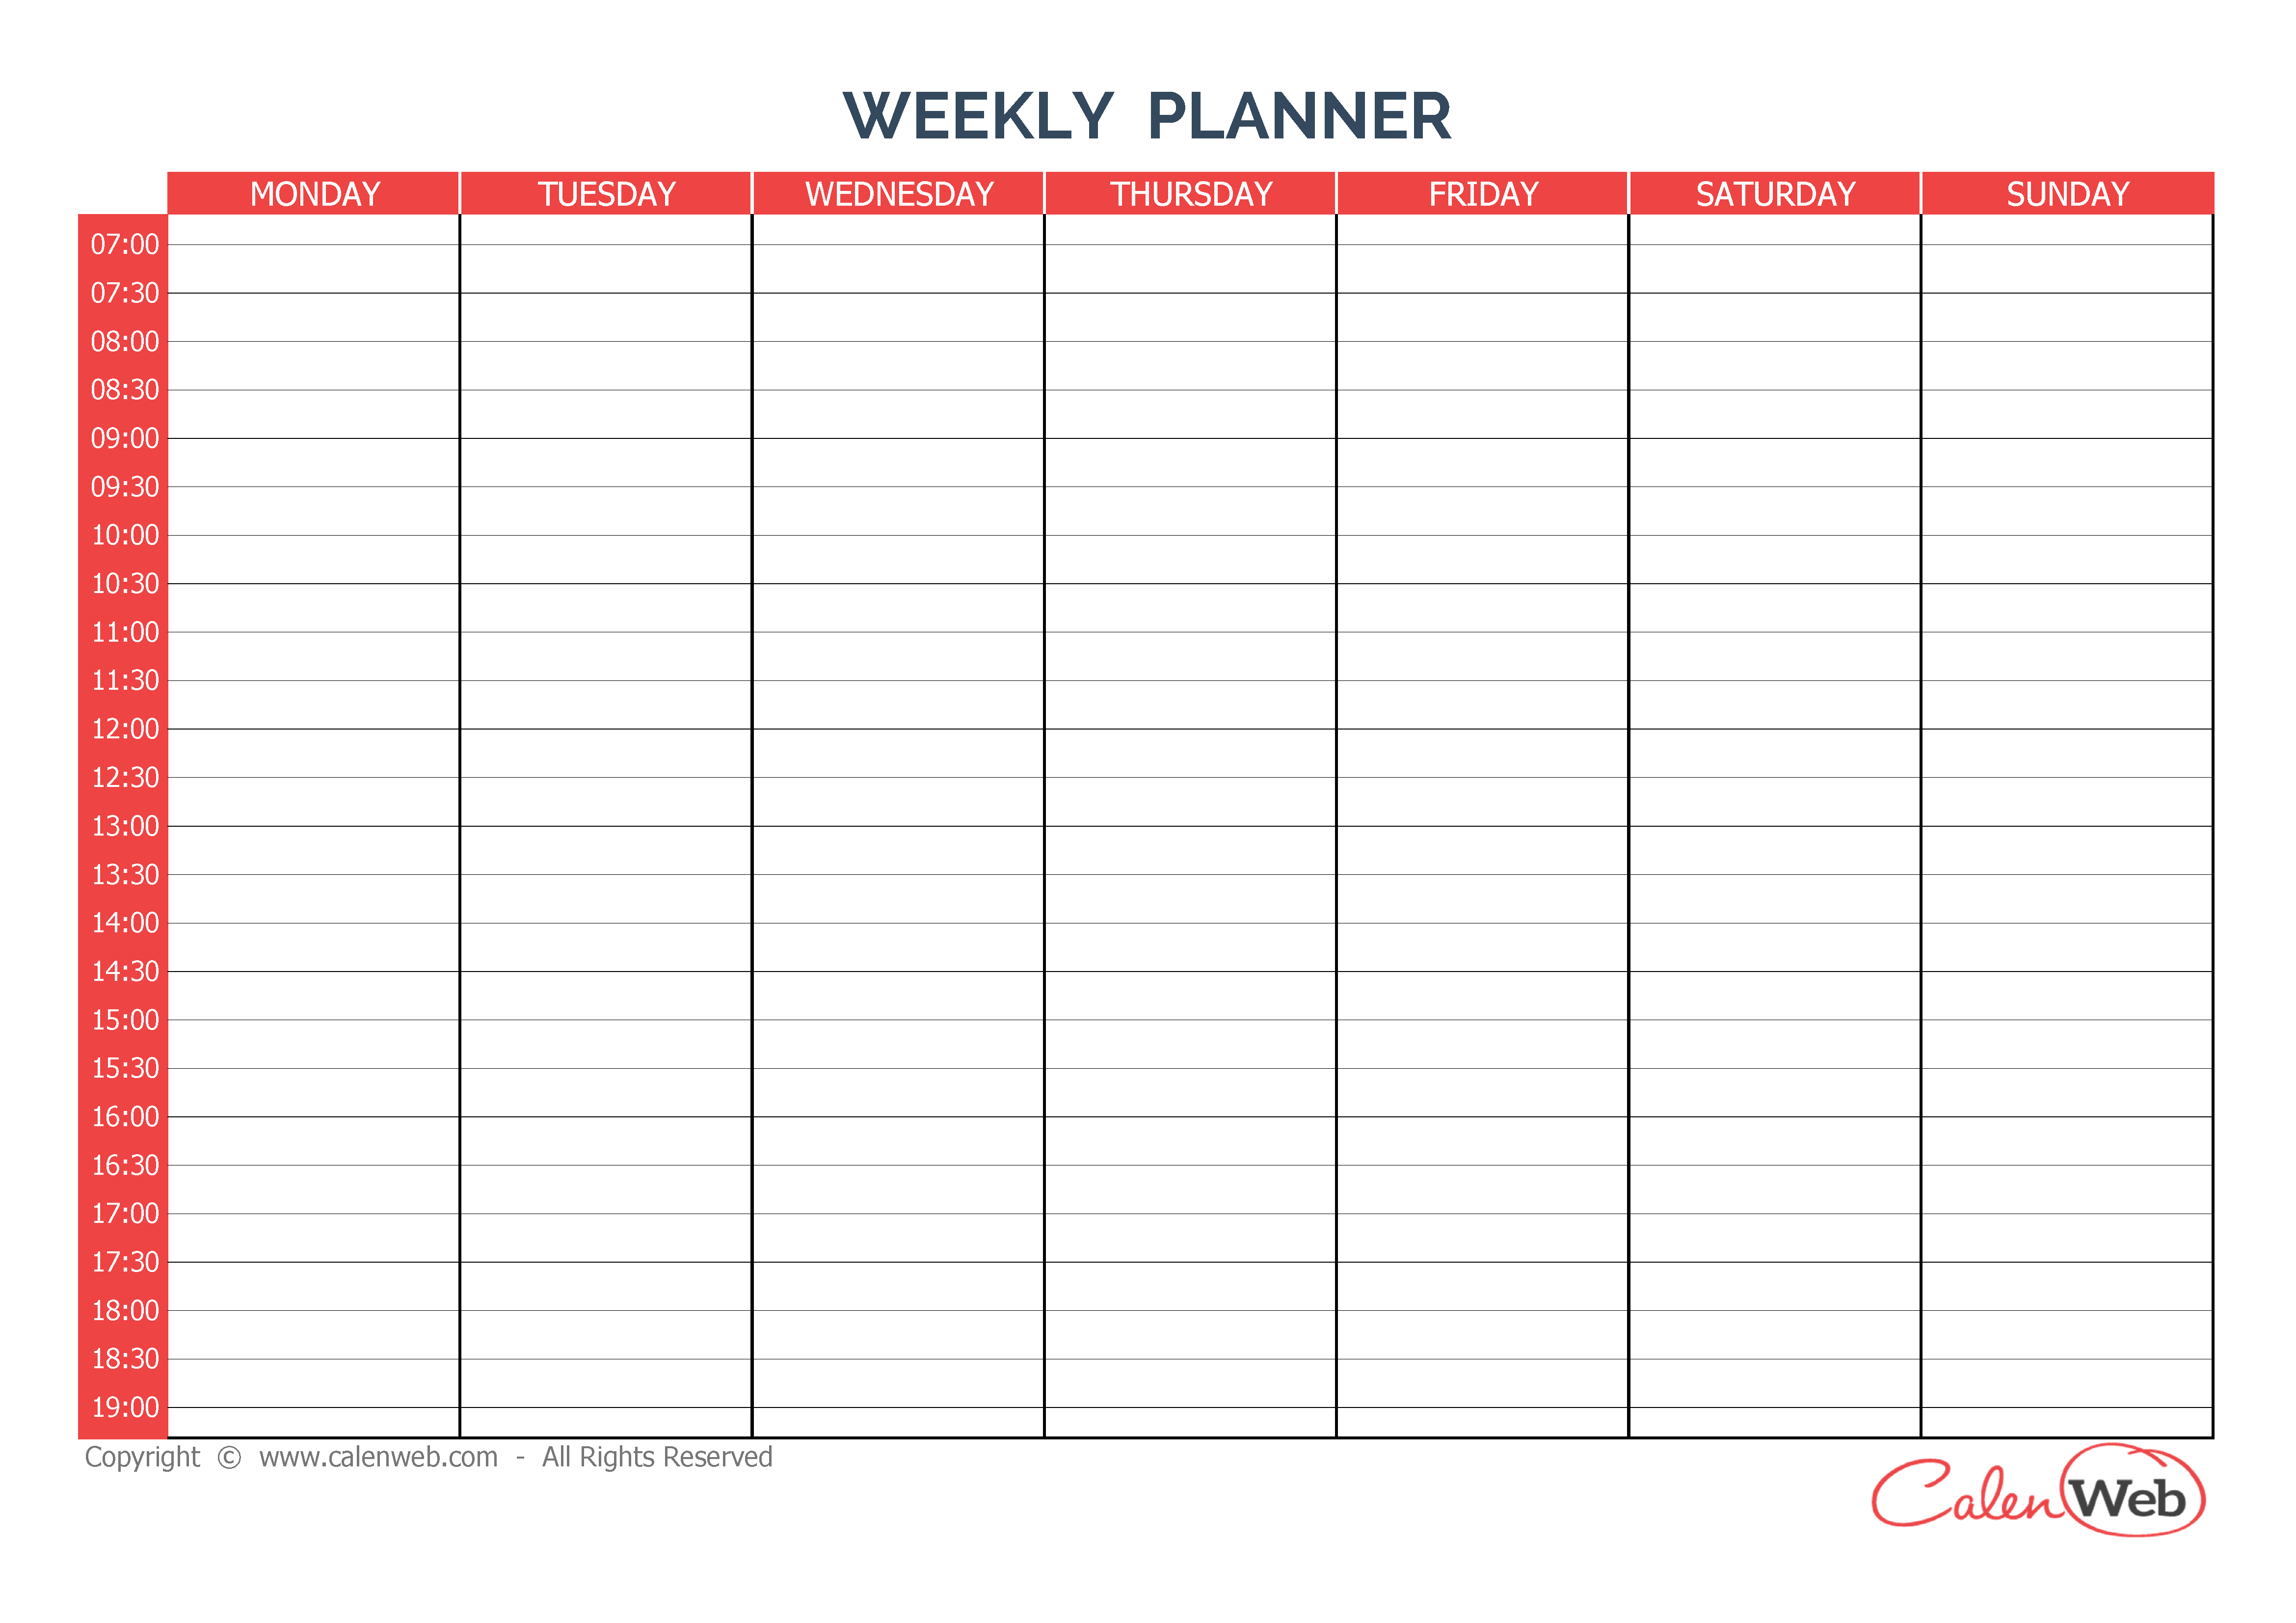 Weekly Planner 7 Days First Day Monday A Week Of 7 Days 